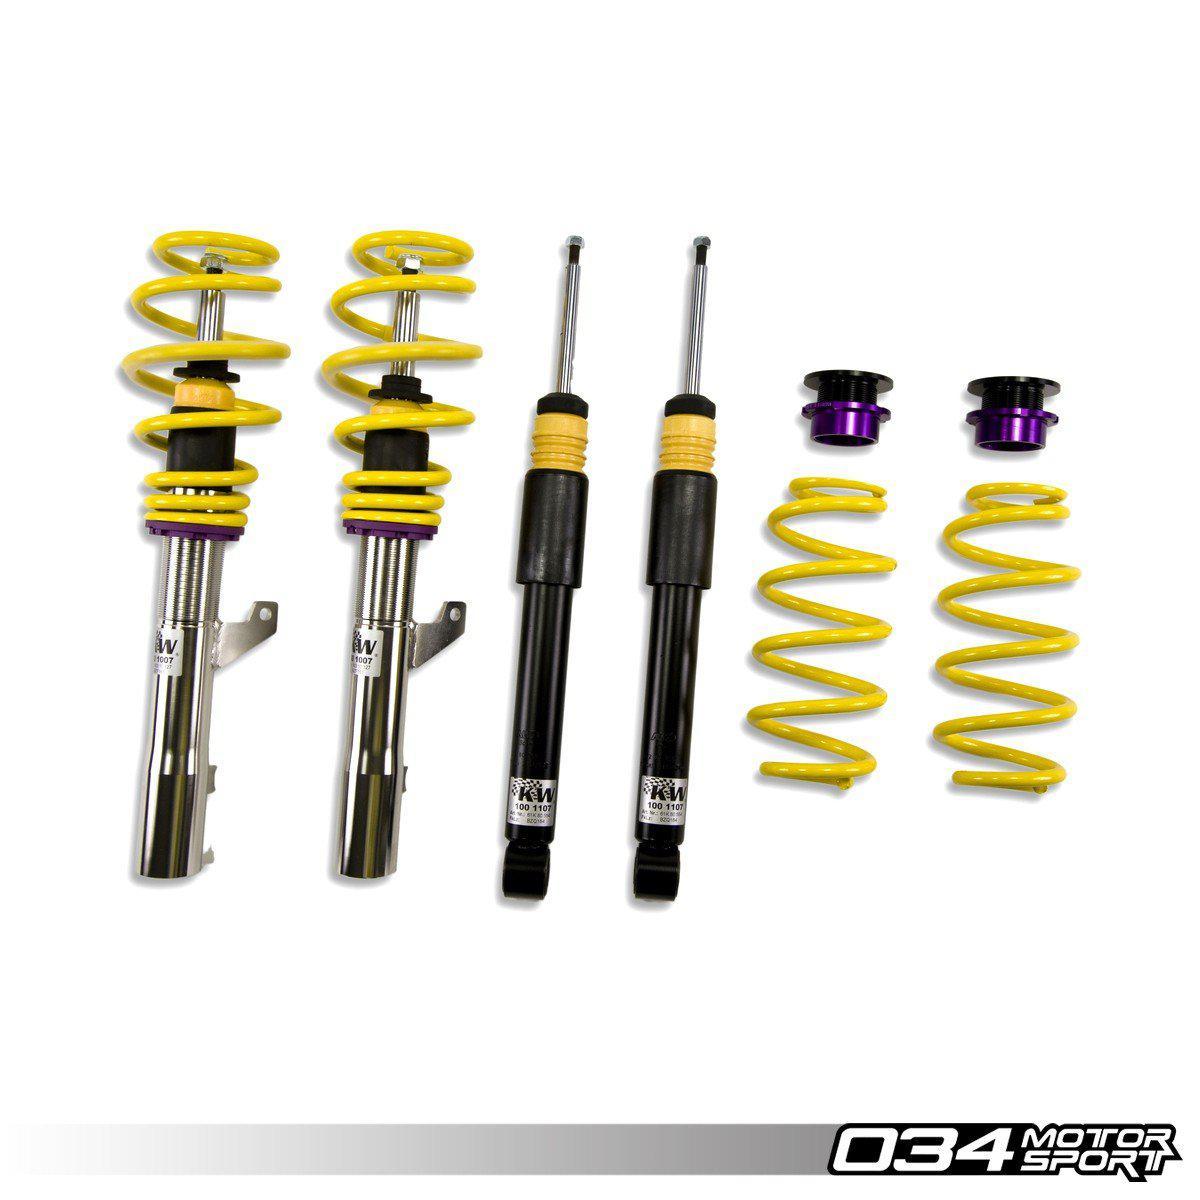 KW Variant 2 Coilover Suspension, MKIV Volkswagen R32-A Little Tuning Co